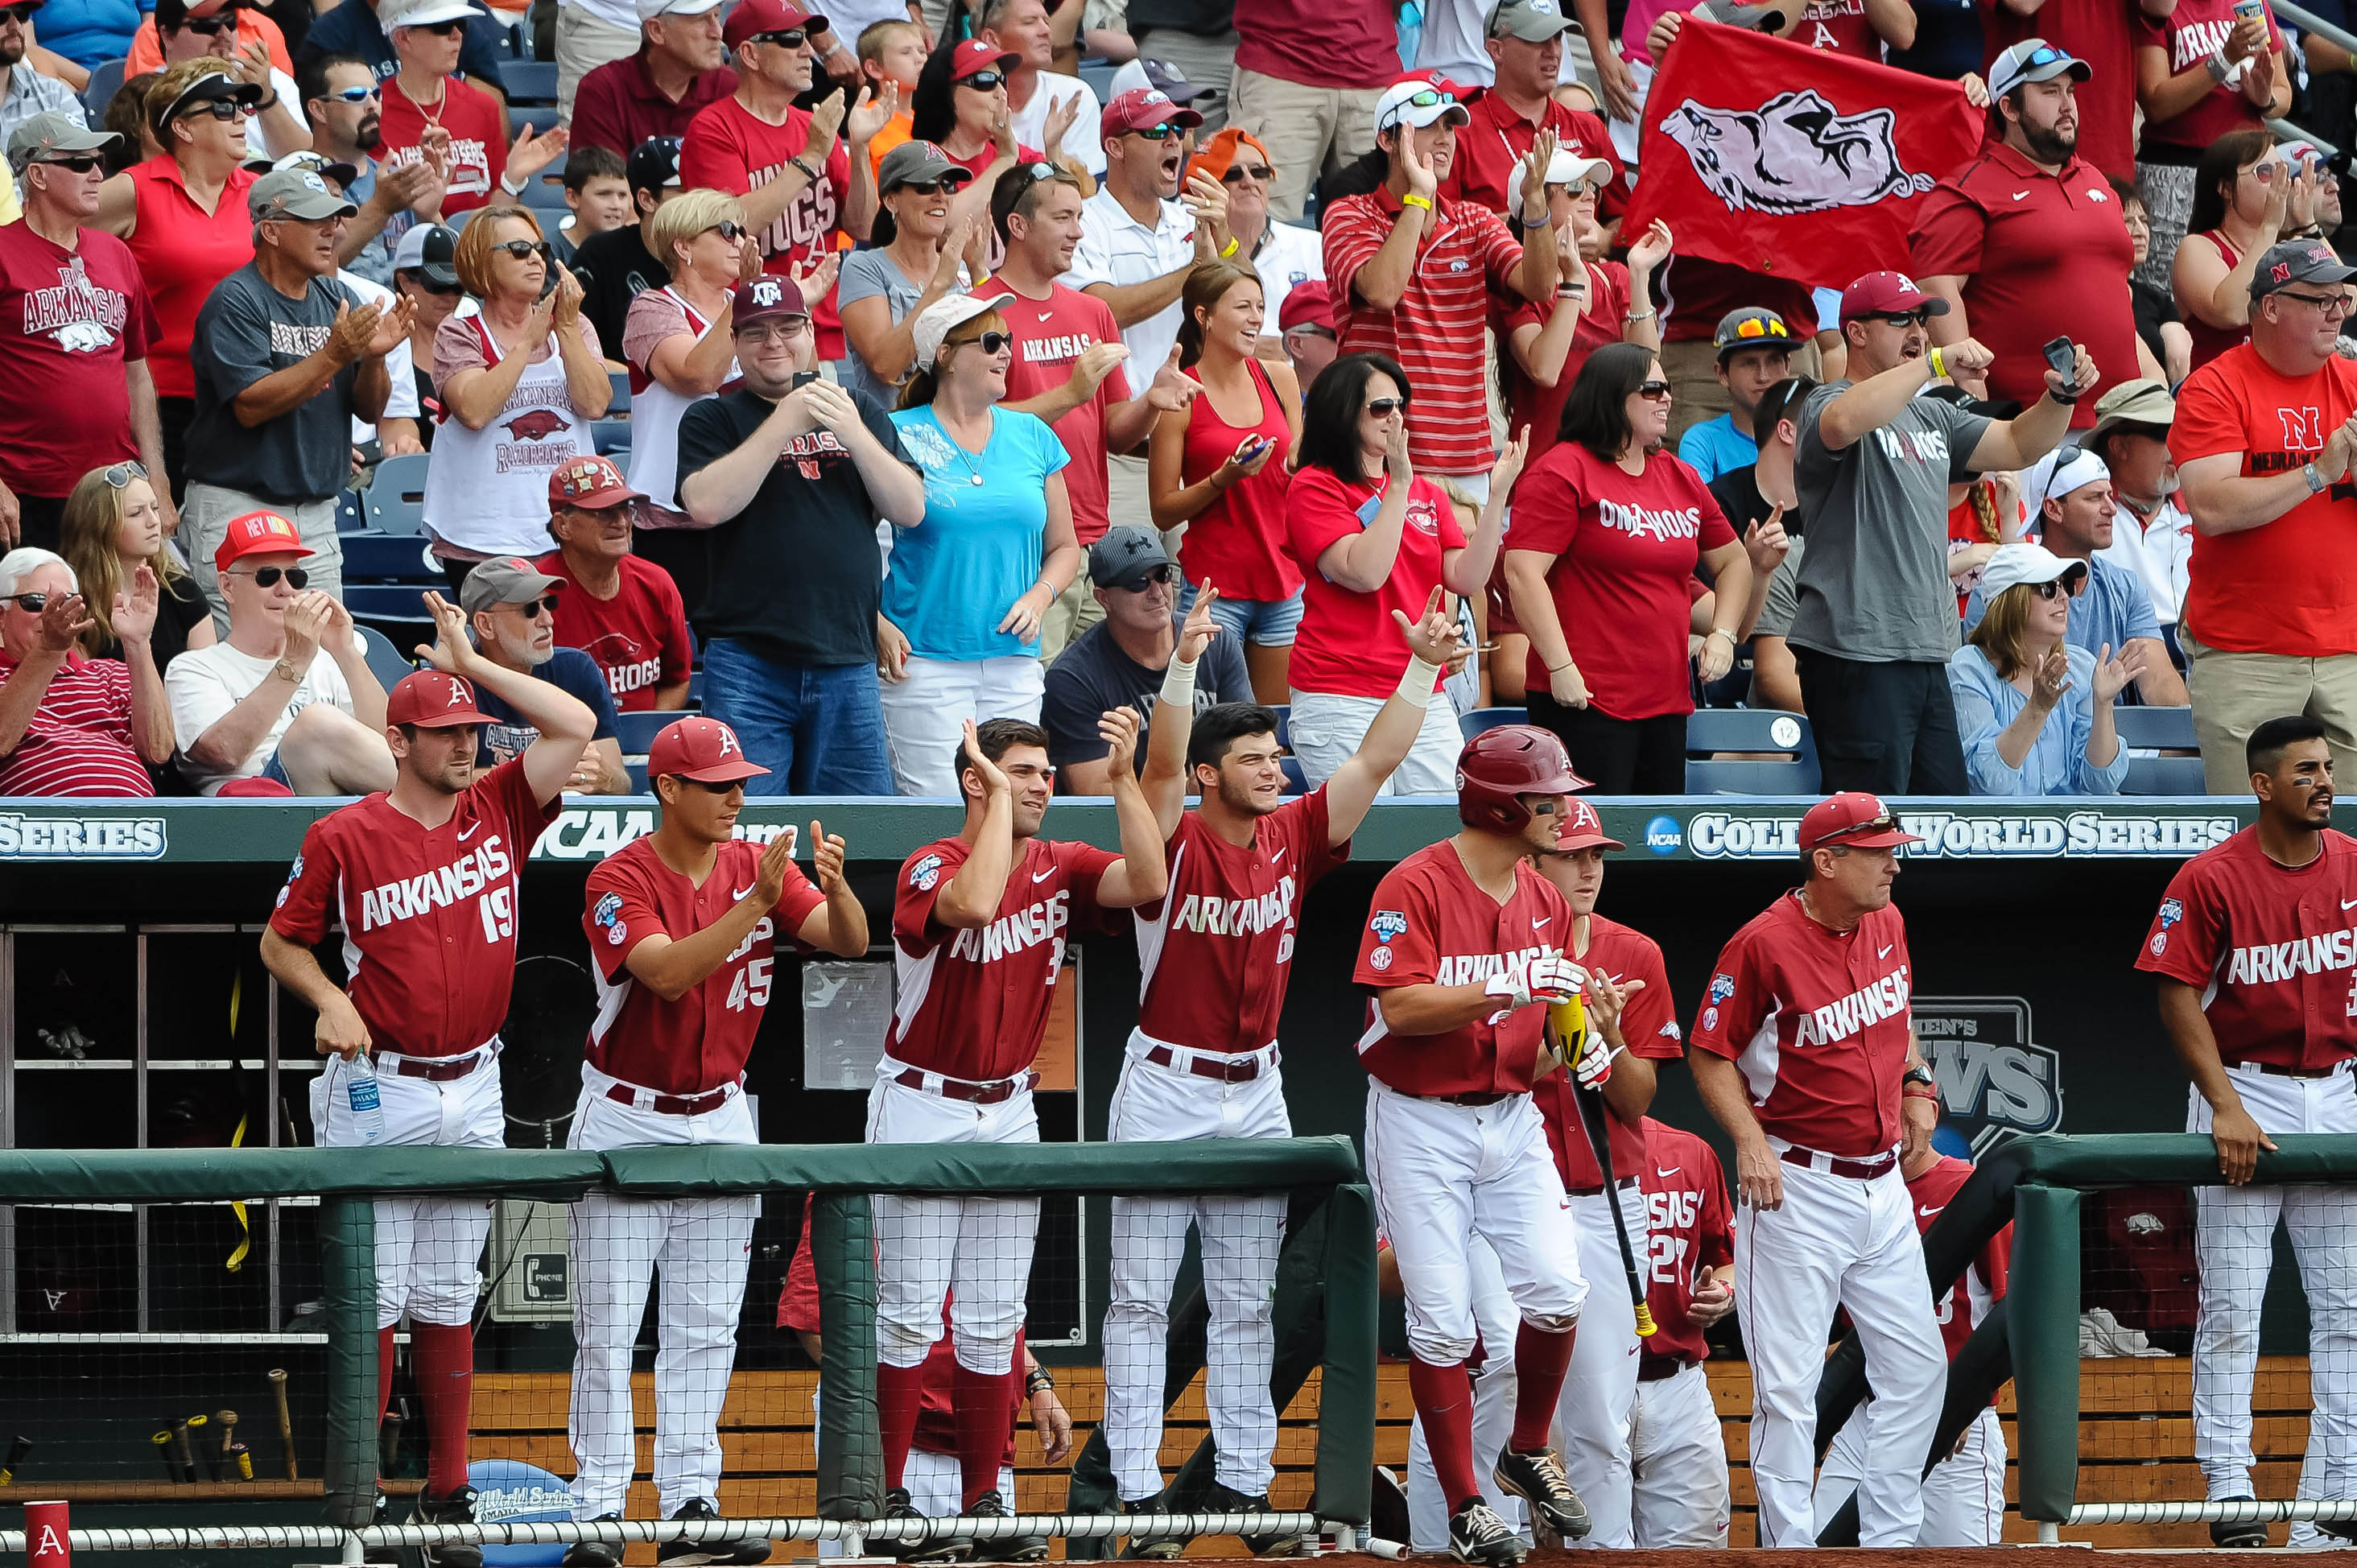 Arkansas' run to the College World Series was one of the year's highlights.